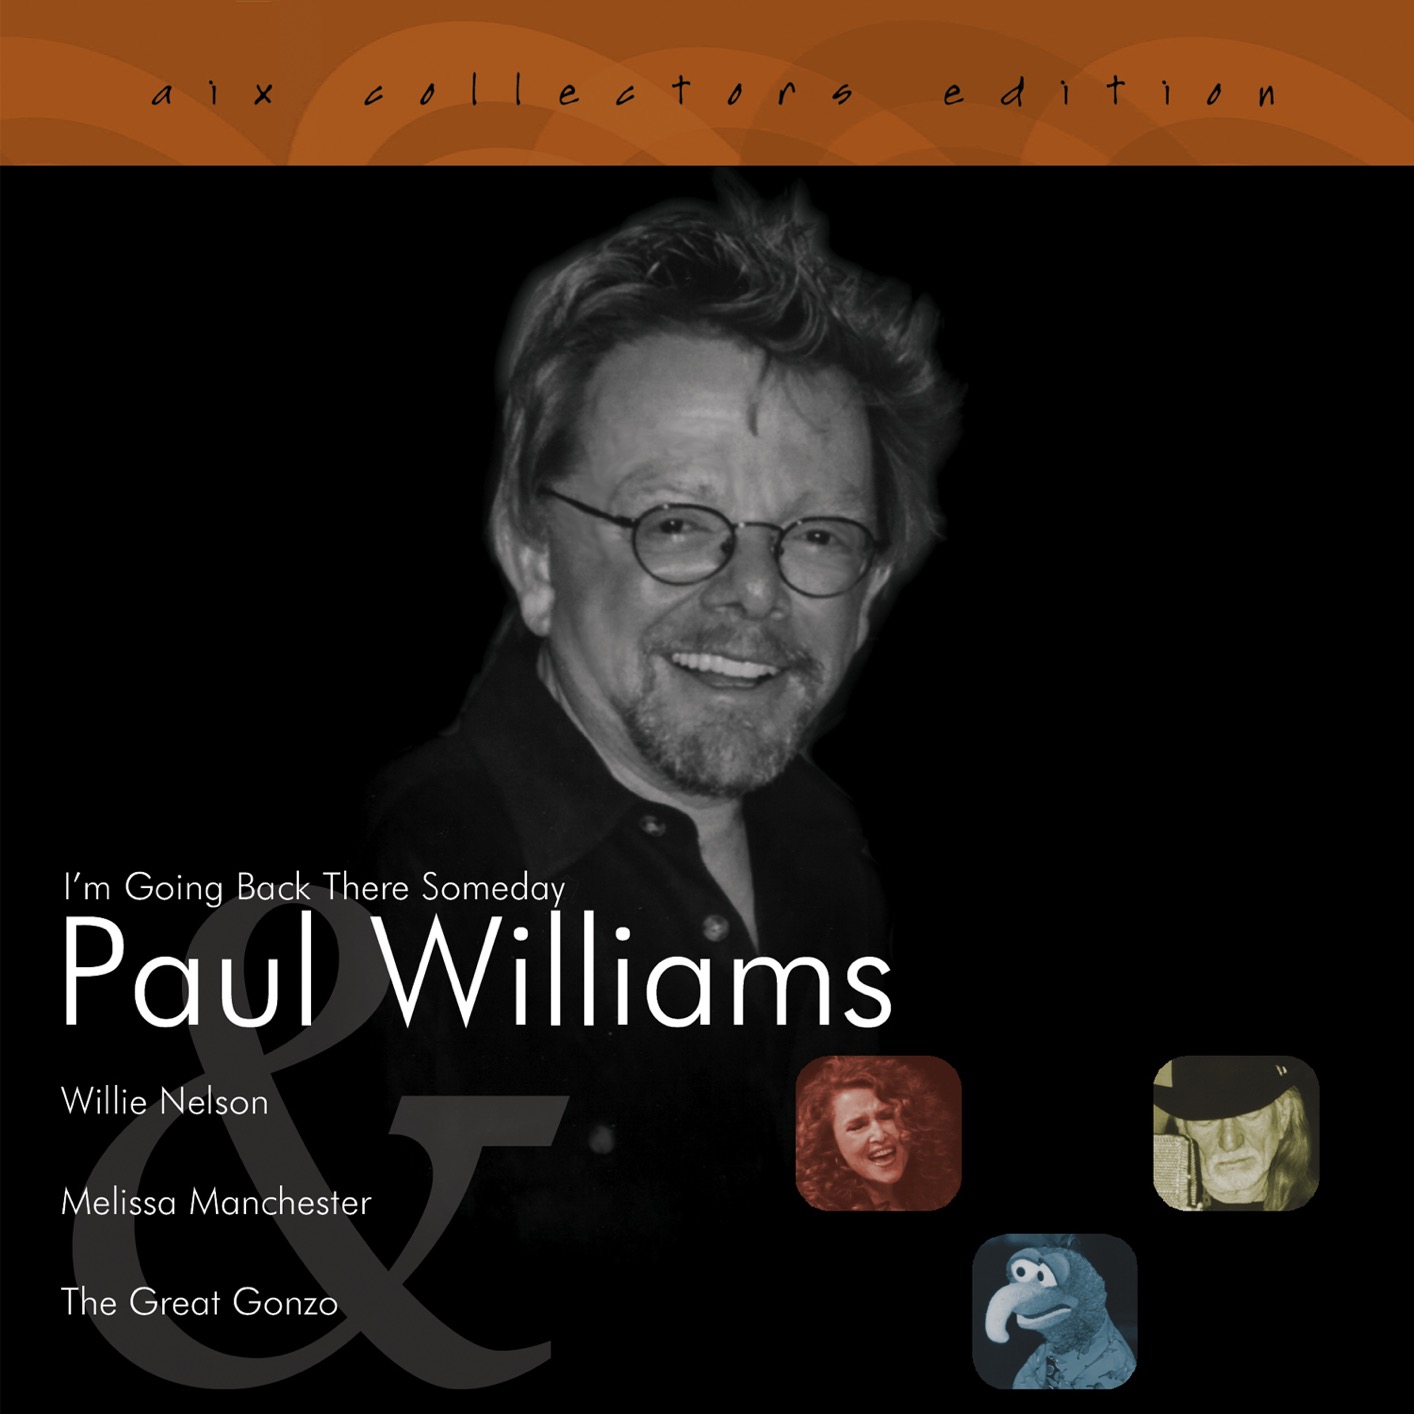 Paul Williams - I’m Going Back There Someday (Remastered) (2006/2019) [FLAC 24bit/96kHz]